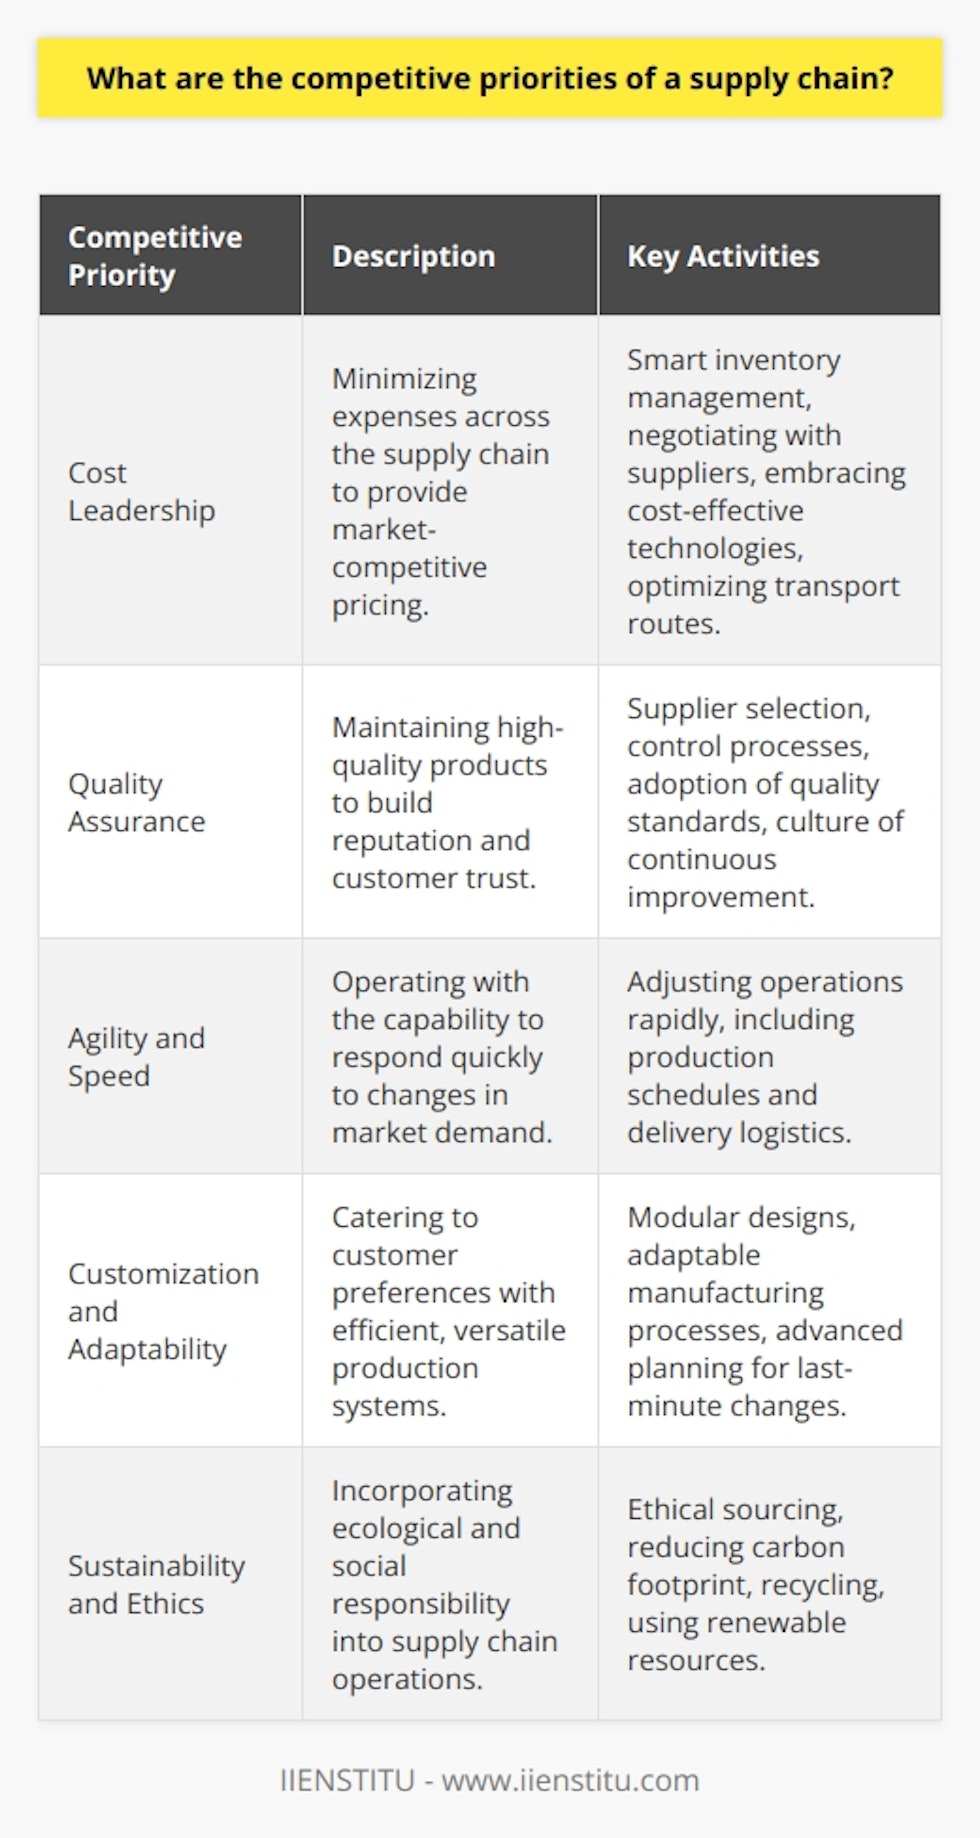 In the modern business landscape, competitive priorities within supply chains represent the strategic focal points a company chooses to gain a market advantage. Here's a detailed look into the competitive priorities crucial to supply chain management:**Cost Leadership**Achieving cost leadership is critical for a competitive advantage in the supply chain. It involves the relentless pursuit of minimizing expenses at every stage – from sourcing materials to delivering the final product to the consumer. This extends beyond mere cost-cutting; it requires a holistic approach to create a lean supply chain through smart inventory management, negotiating better terms with suppliers, embracing cost-efficient technologies and optimizing transport routes.**Quality Assurance**High-quality products are non-negotiable for maintaining a competitive stance. Supply chains must ensure that every product meets stringent quality criteria. This commitment to quality encompasses meticulous supplier selection, stringent control processes, adoption of international quality standards, and a culture of continuous improvement. Ensuring quality also builds brand reputation and customer trust, which are invaluable assets in a competitive market.**Agility and Speed**In a fast-paced world, the ability to react swiftly to market volatility is another competitive priority. Supply chains must operate with agility, allowing them to handle unexpected disruptions or surges in demand effortlessly. An agile supply chain can rapidly adjust its operations, from production scheduling to delivery logistics. This speed to market is often the difference between capitalizing on opportunities and missing them altogether.**Customization and Adaptability**Customization offers a unique position in the market, catering to the individual preferences of customers. A supply chain optimized for customization can handle diverse product variations without compromising efficiency. This involves modular product designs, versatile manufacturing processes, and advanced planning systems capable of adapting to last-minute changes. Such adaptability not only satisfies customer demands but also reinforces loyalty and market differentiation.**Sustainability and Ethics**Corporate responsibility and sustainable practices have transcended from being optional to a competitive necessity. Customers and stakeholders increasingly make decisions based on a company’s environmental and social impact. Ethical sourcing, reducing carbon footprint through efficient logistics, recycling, and using renewable resources are all aspects that can fortify a supply chain's sustainability profile. A commitment to sustainable practices is often rewarded with enhanced customer allegiance and brand value.To operationalize these competitive priorities, companies often rely on advanced training and certification programs offered by reputable institutions such as IIENSTITU, to ensure their workforce is skilled in the latest supply chain management techniques and best practices.In essence, for a supply chain to be competitive, cost efficiency, quality, speed, customization, and sustainability are not just isolated objectives but are interconnected facets of a cohesive strategy. Mastery in these competitive priorities enables organizations to thrive and outperform in an ever-evolving competitive landscape.